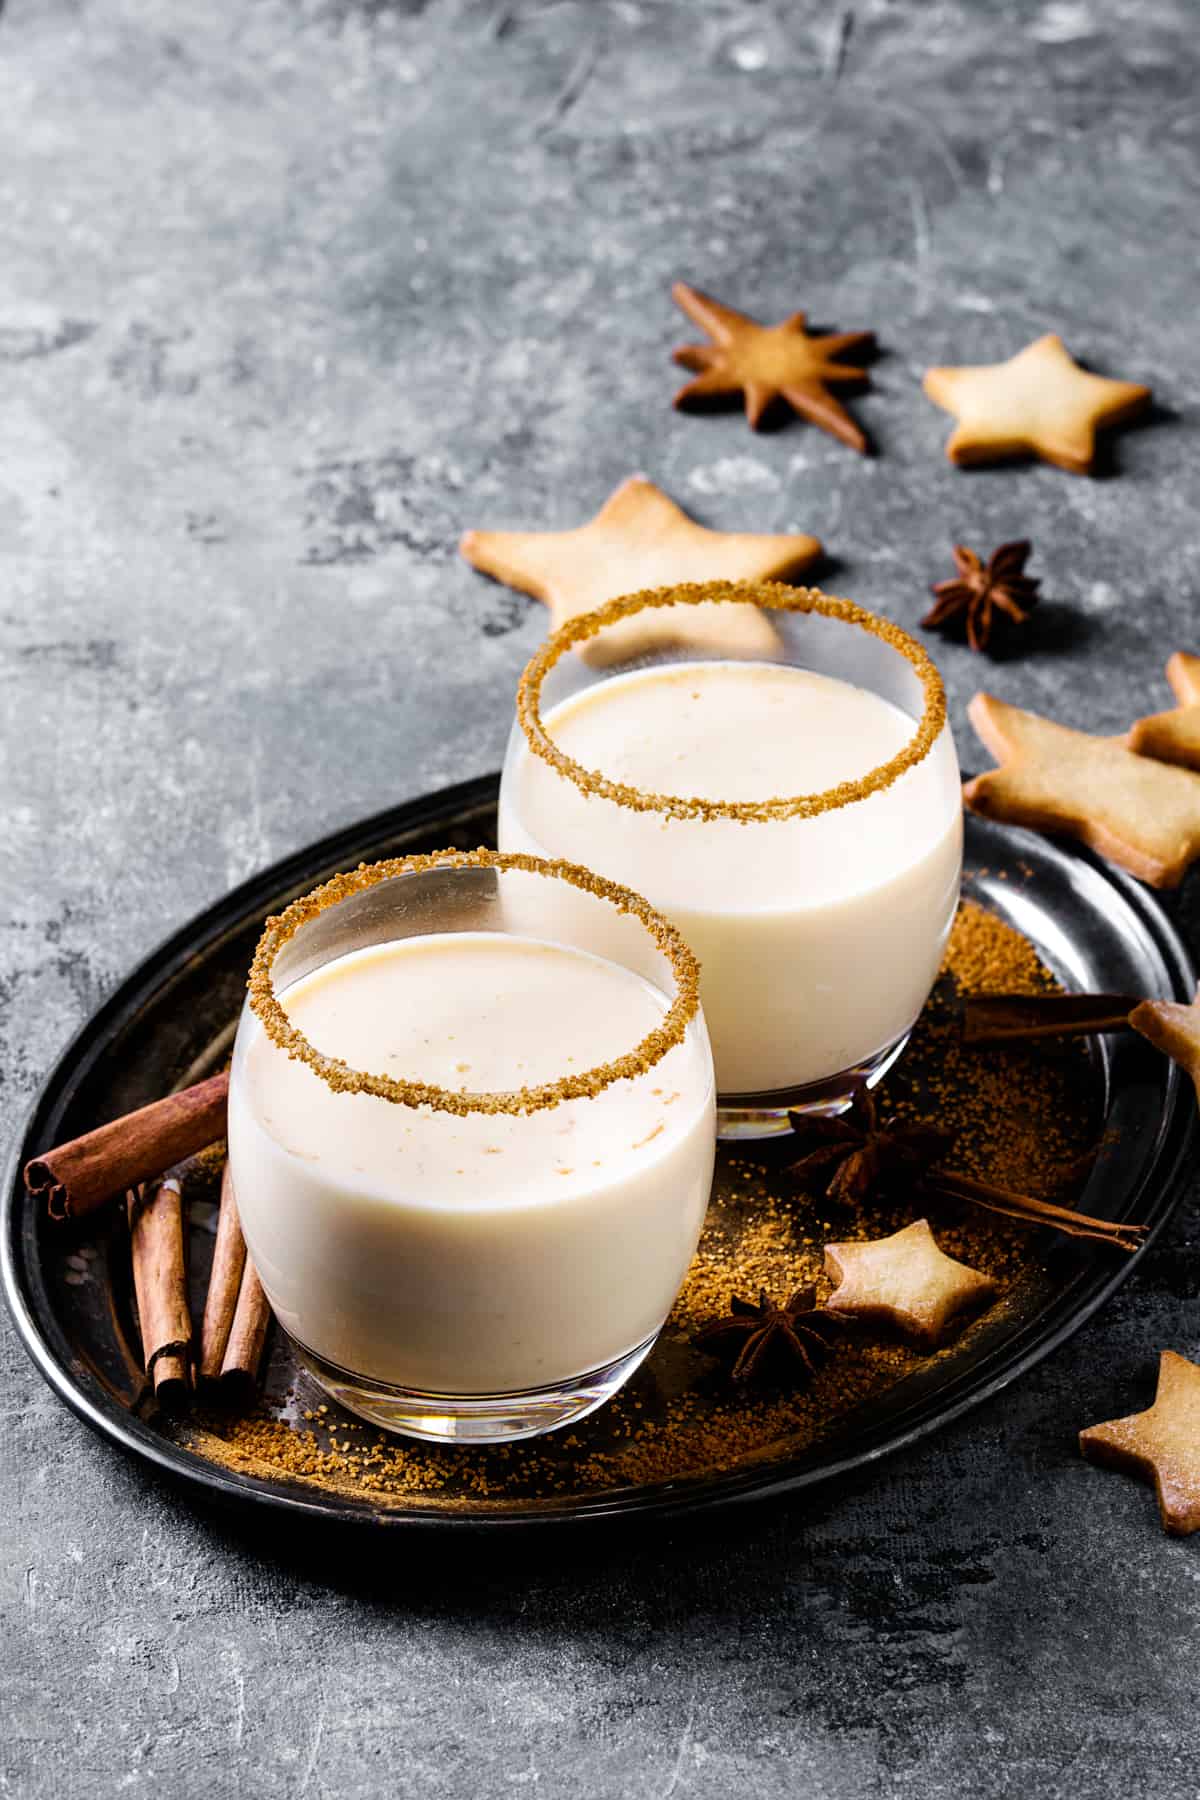 Eggnog cocktail with cinnamon, served in two glasses with star shape sugar cookies, fir branch over gray background.